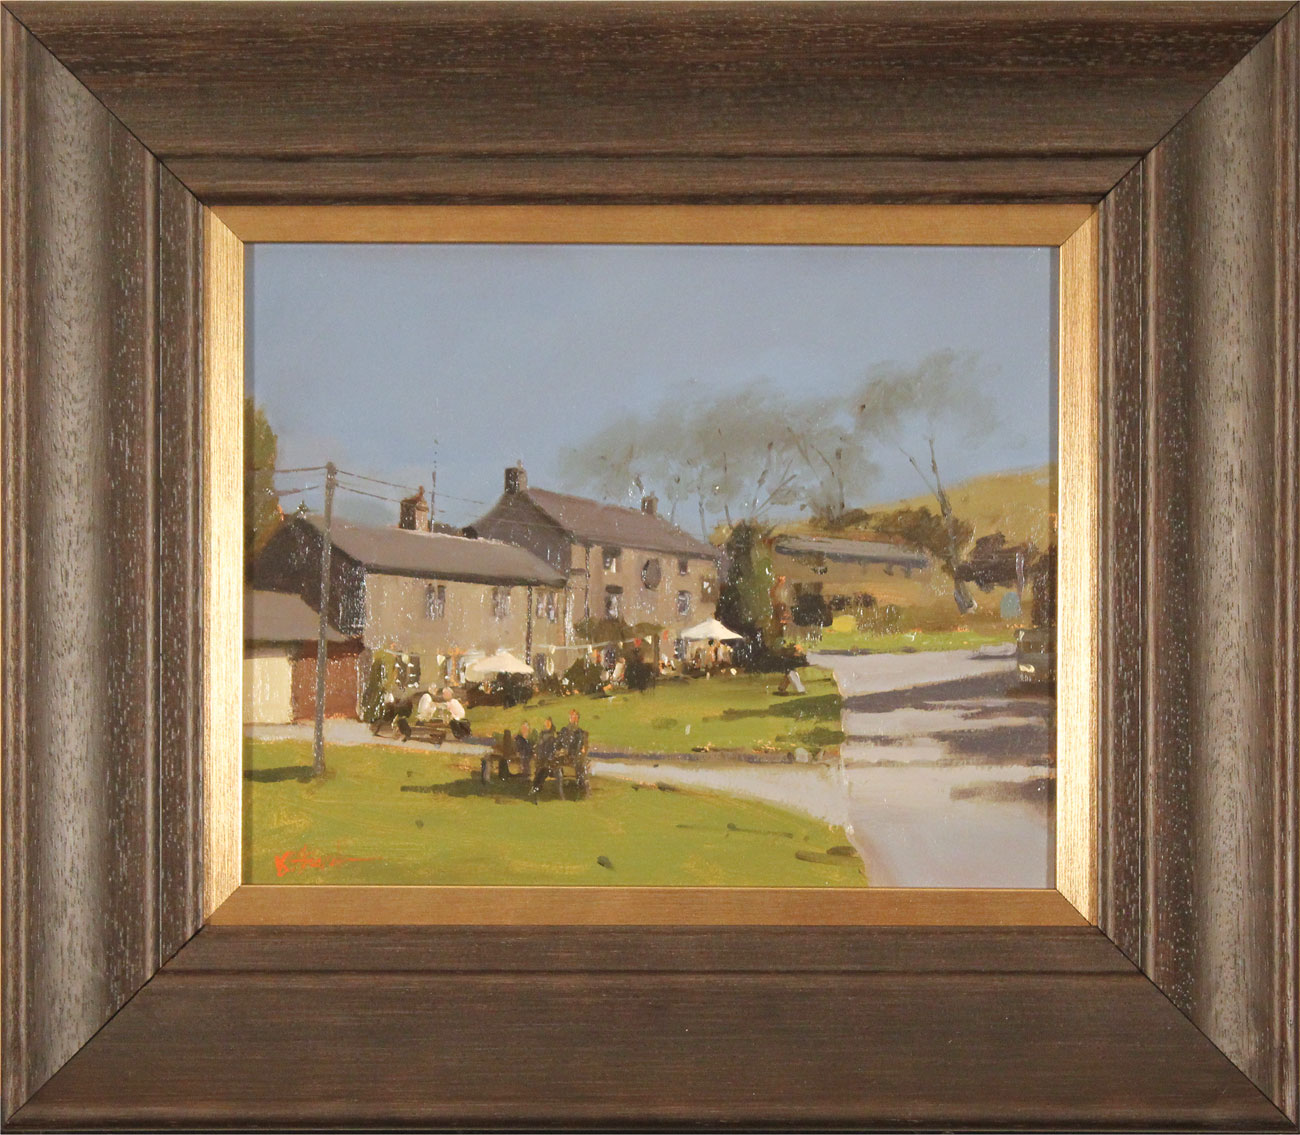 Michael John Ashcroft, ROI, Original oil painting on panel, A Pint at the Lister Arms, Malham, Yorkshire. Click to enlarge